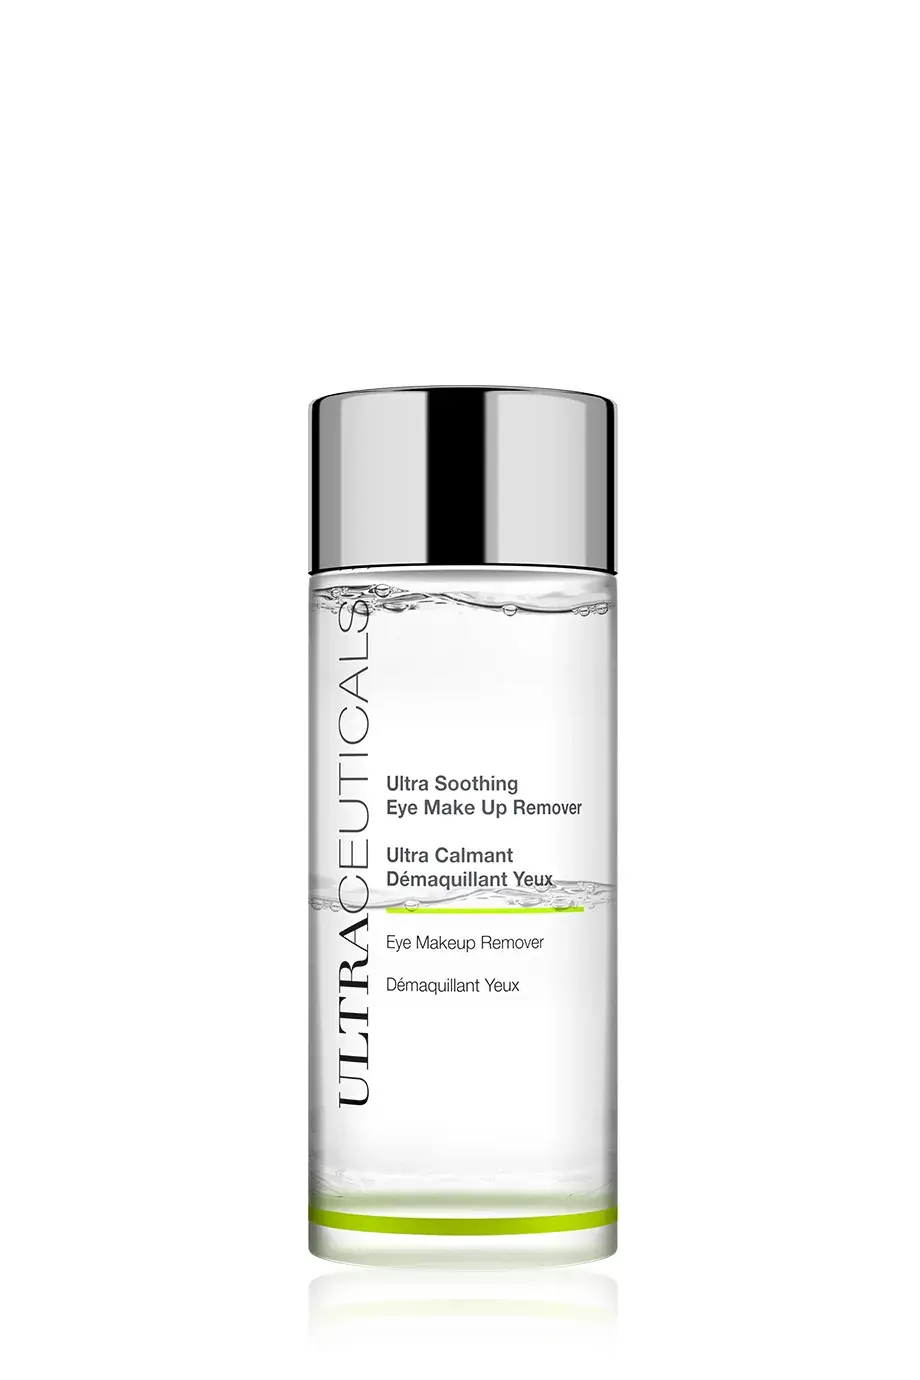 Ultraceuticals Ultra Soothing Eye Make-up Remover